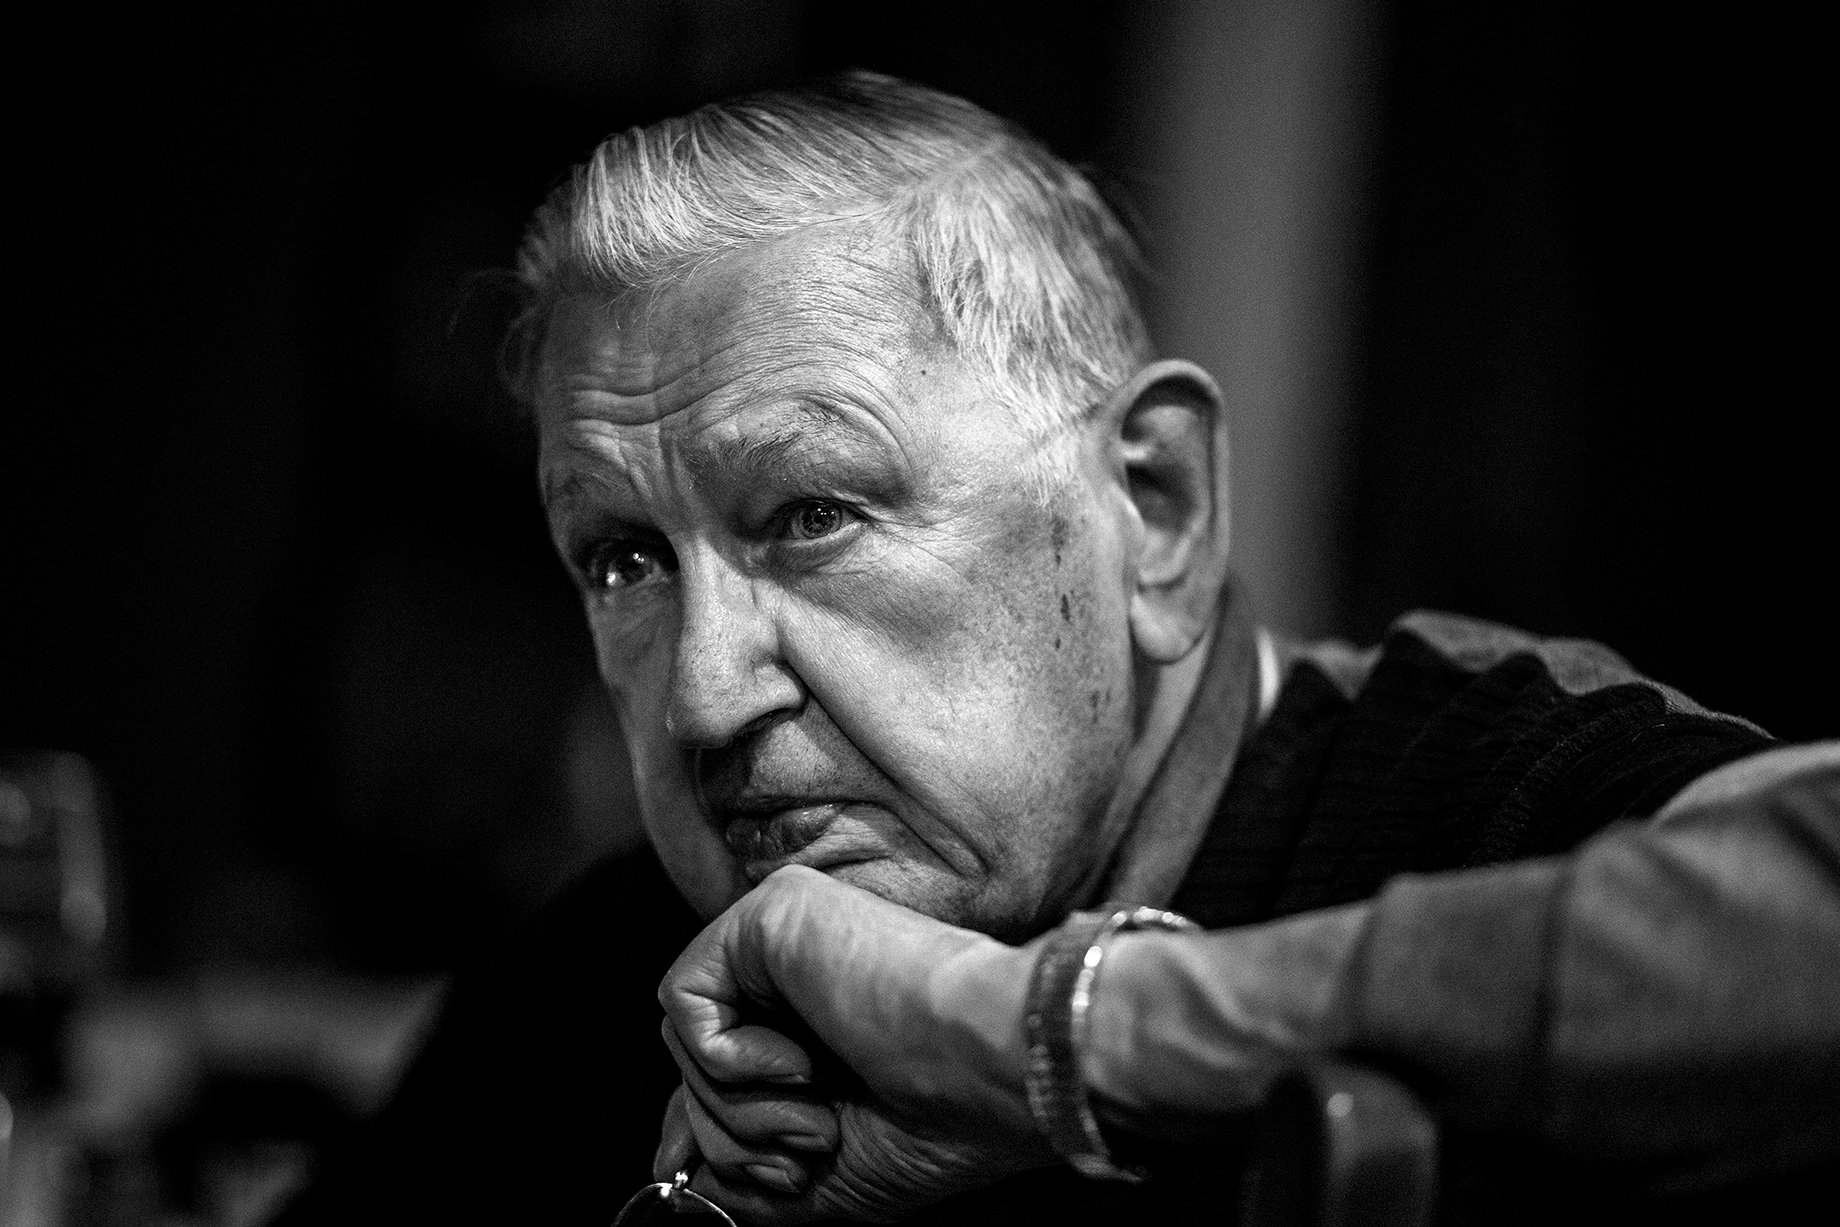 Photographer Sean Scheidt's grandfather looking away from the camera shot in black and white